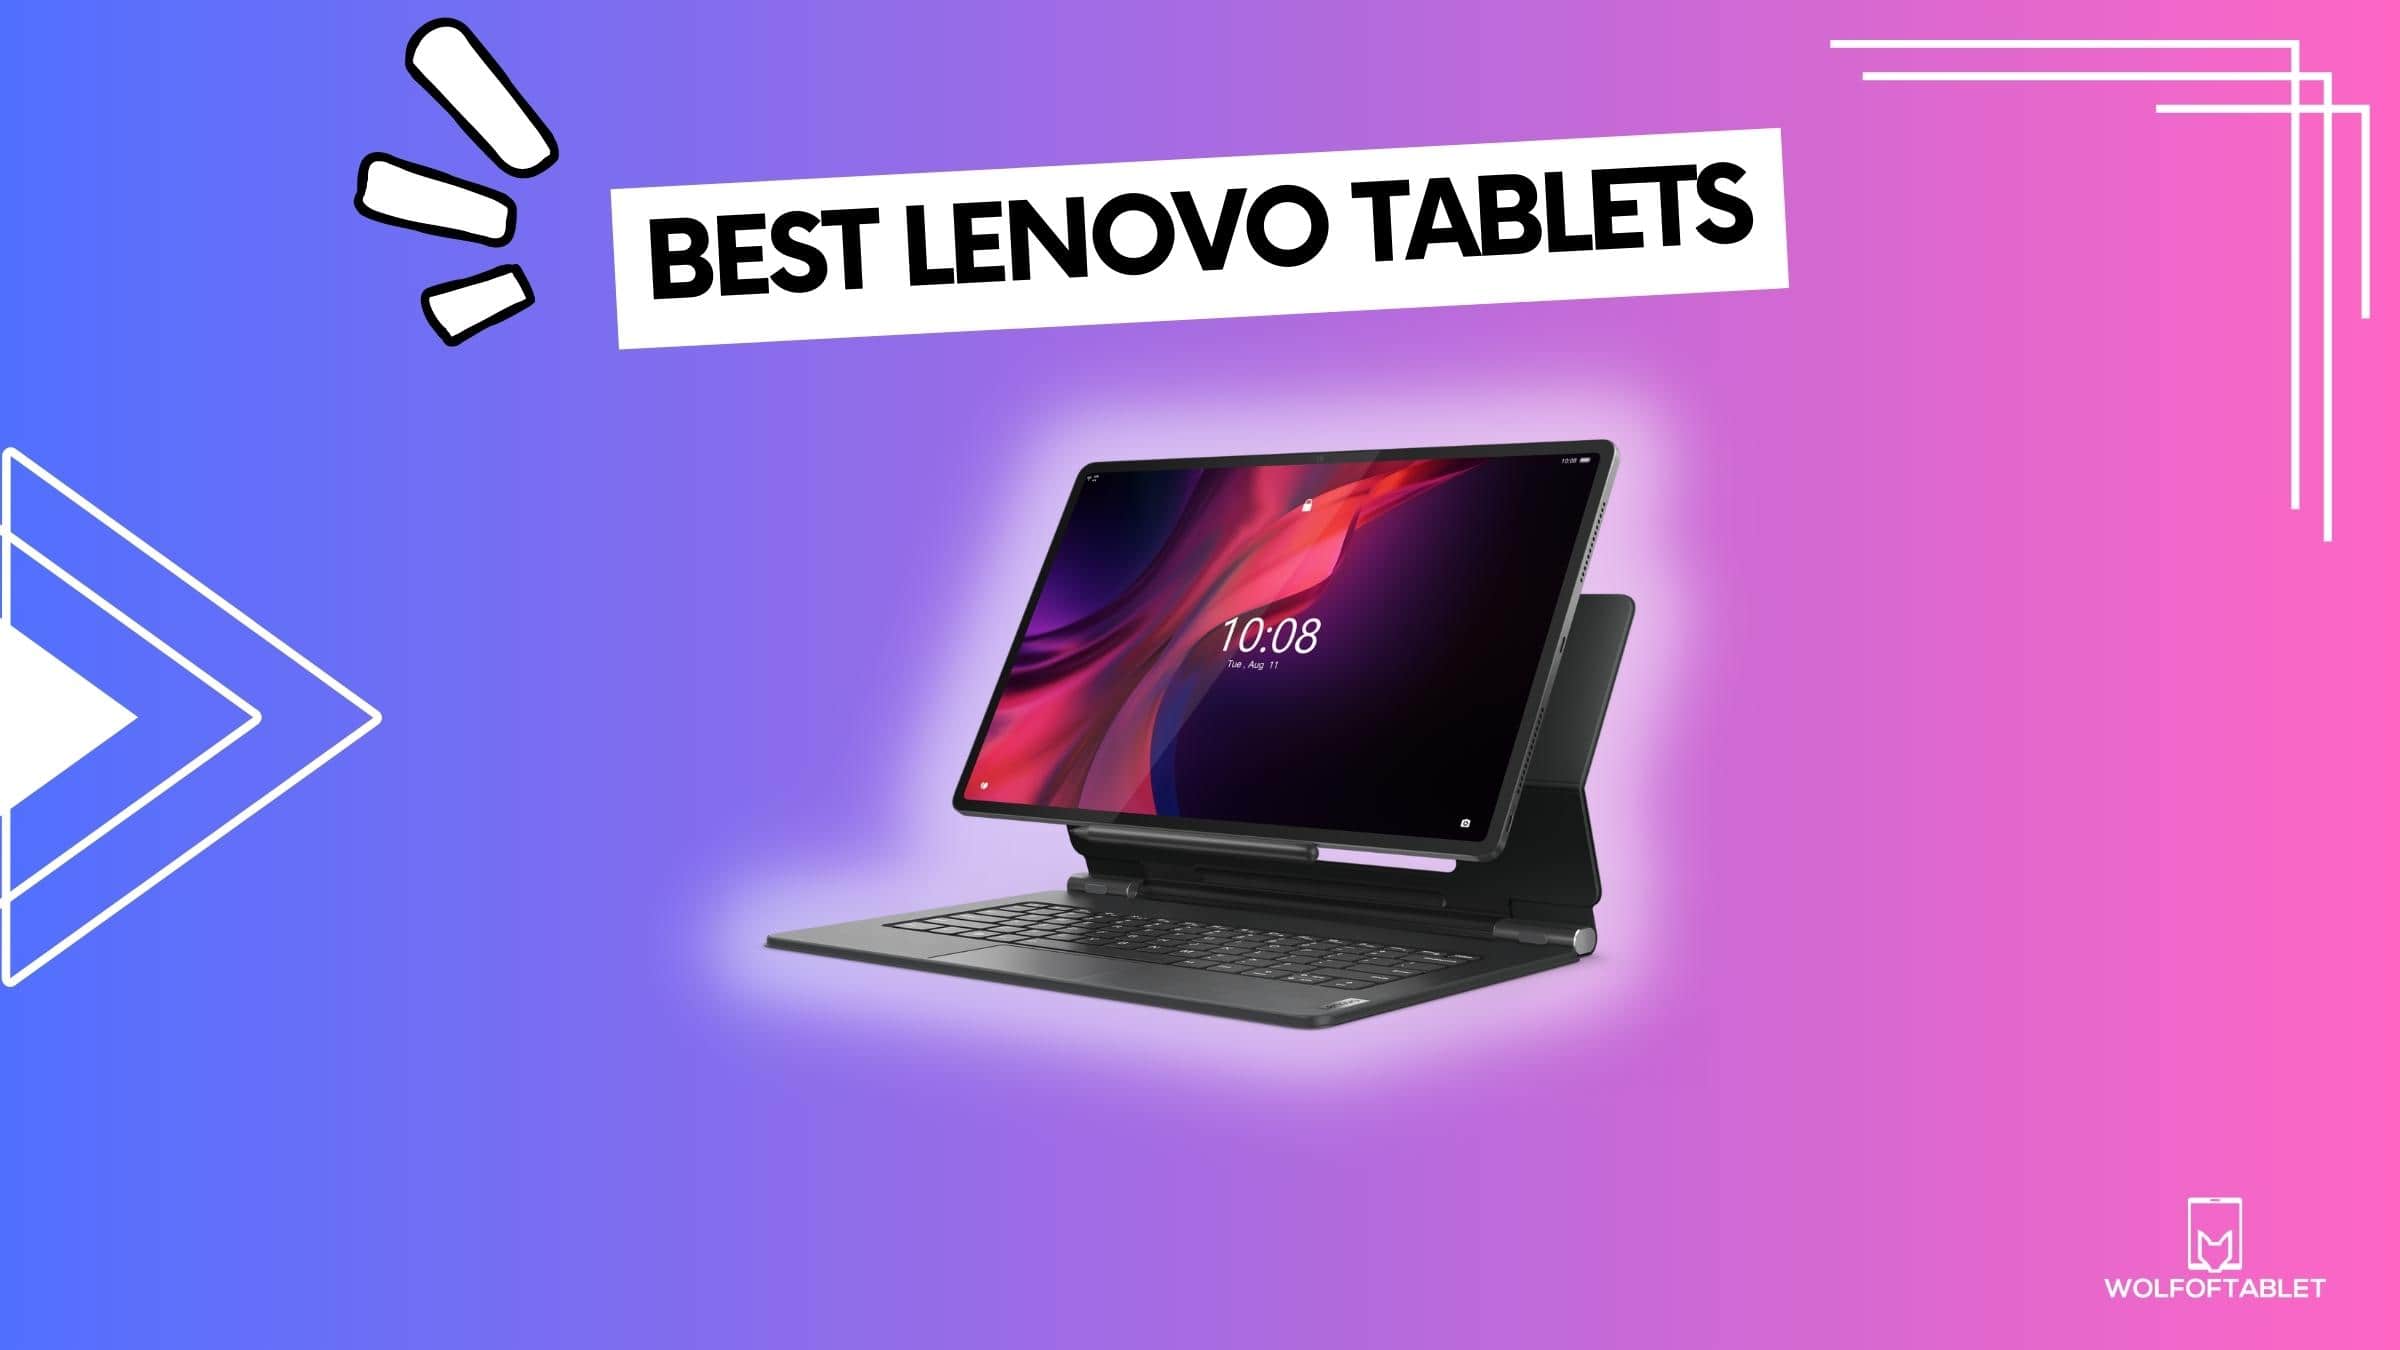 take a look at the best lenovo tablets in the market